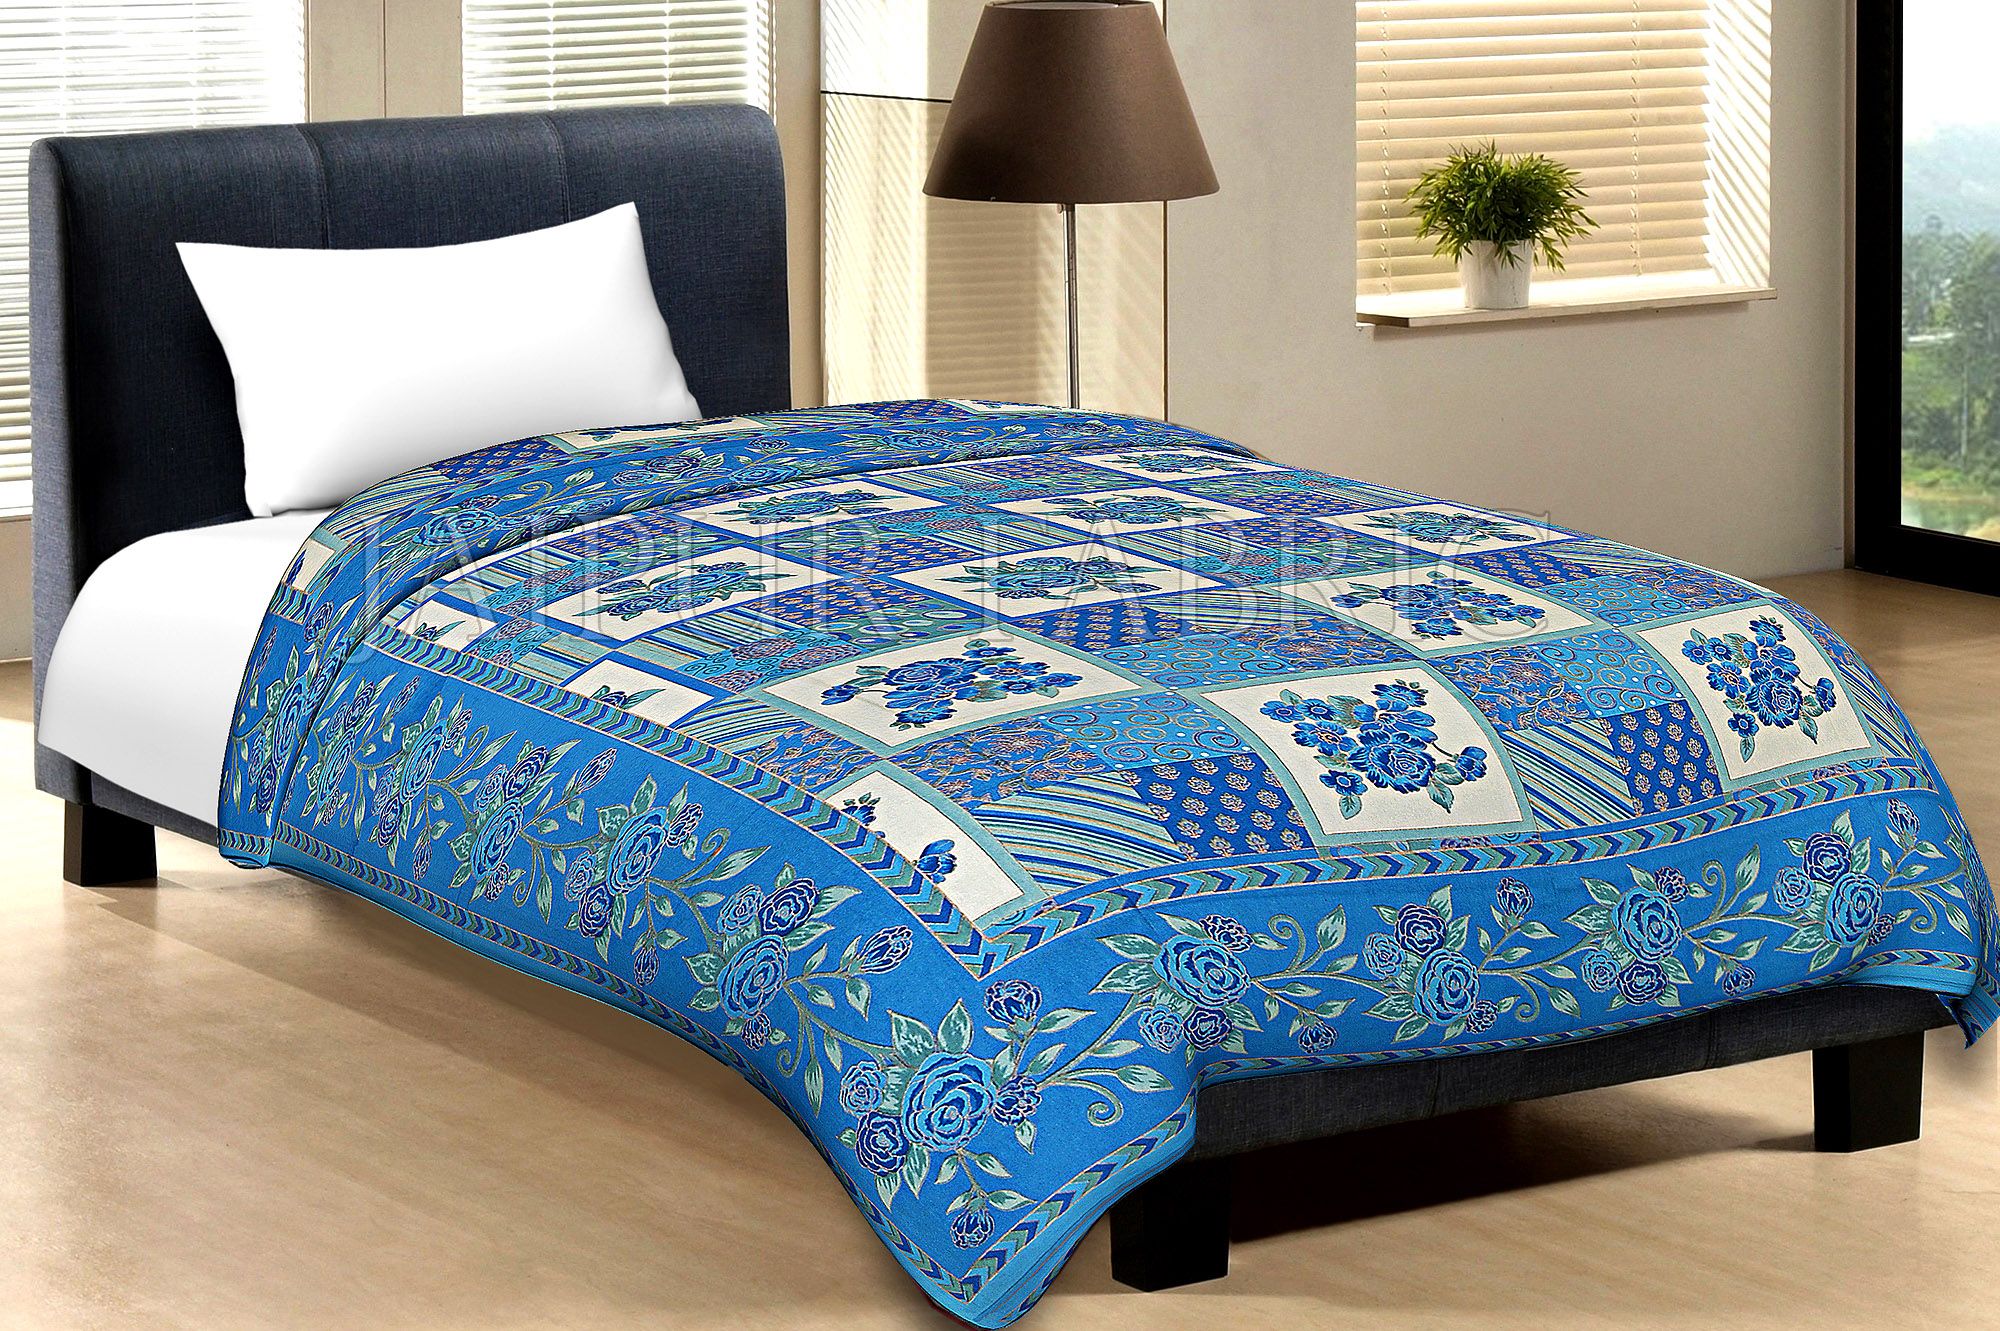 Blue Border Cream Base Flower And Check With Golden Shining Print Cotton Single Bed Sheet With Out Pillow Cover